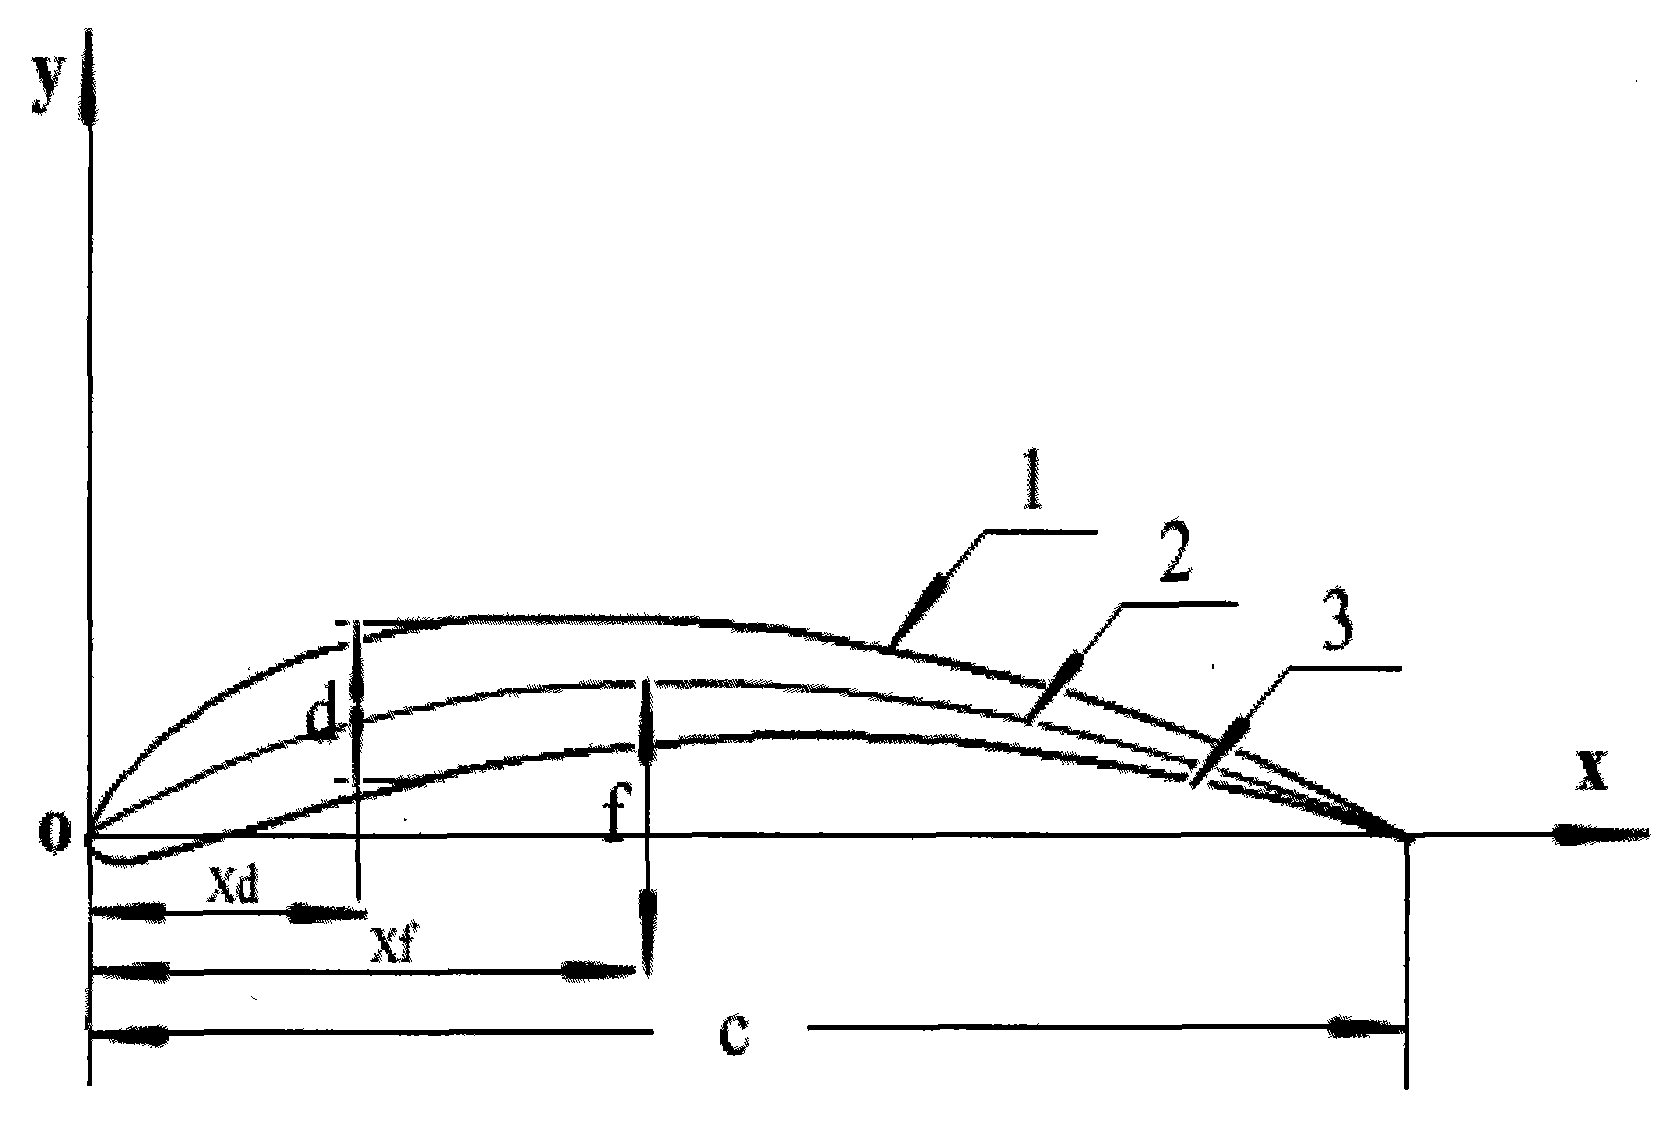 Vane airfoil profile of low power wind driven generator